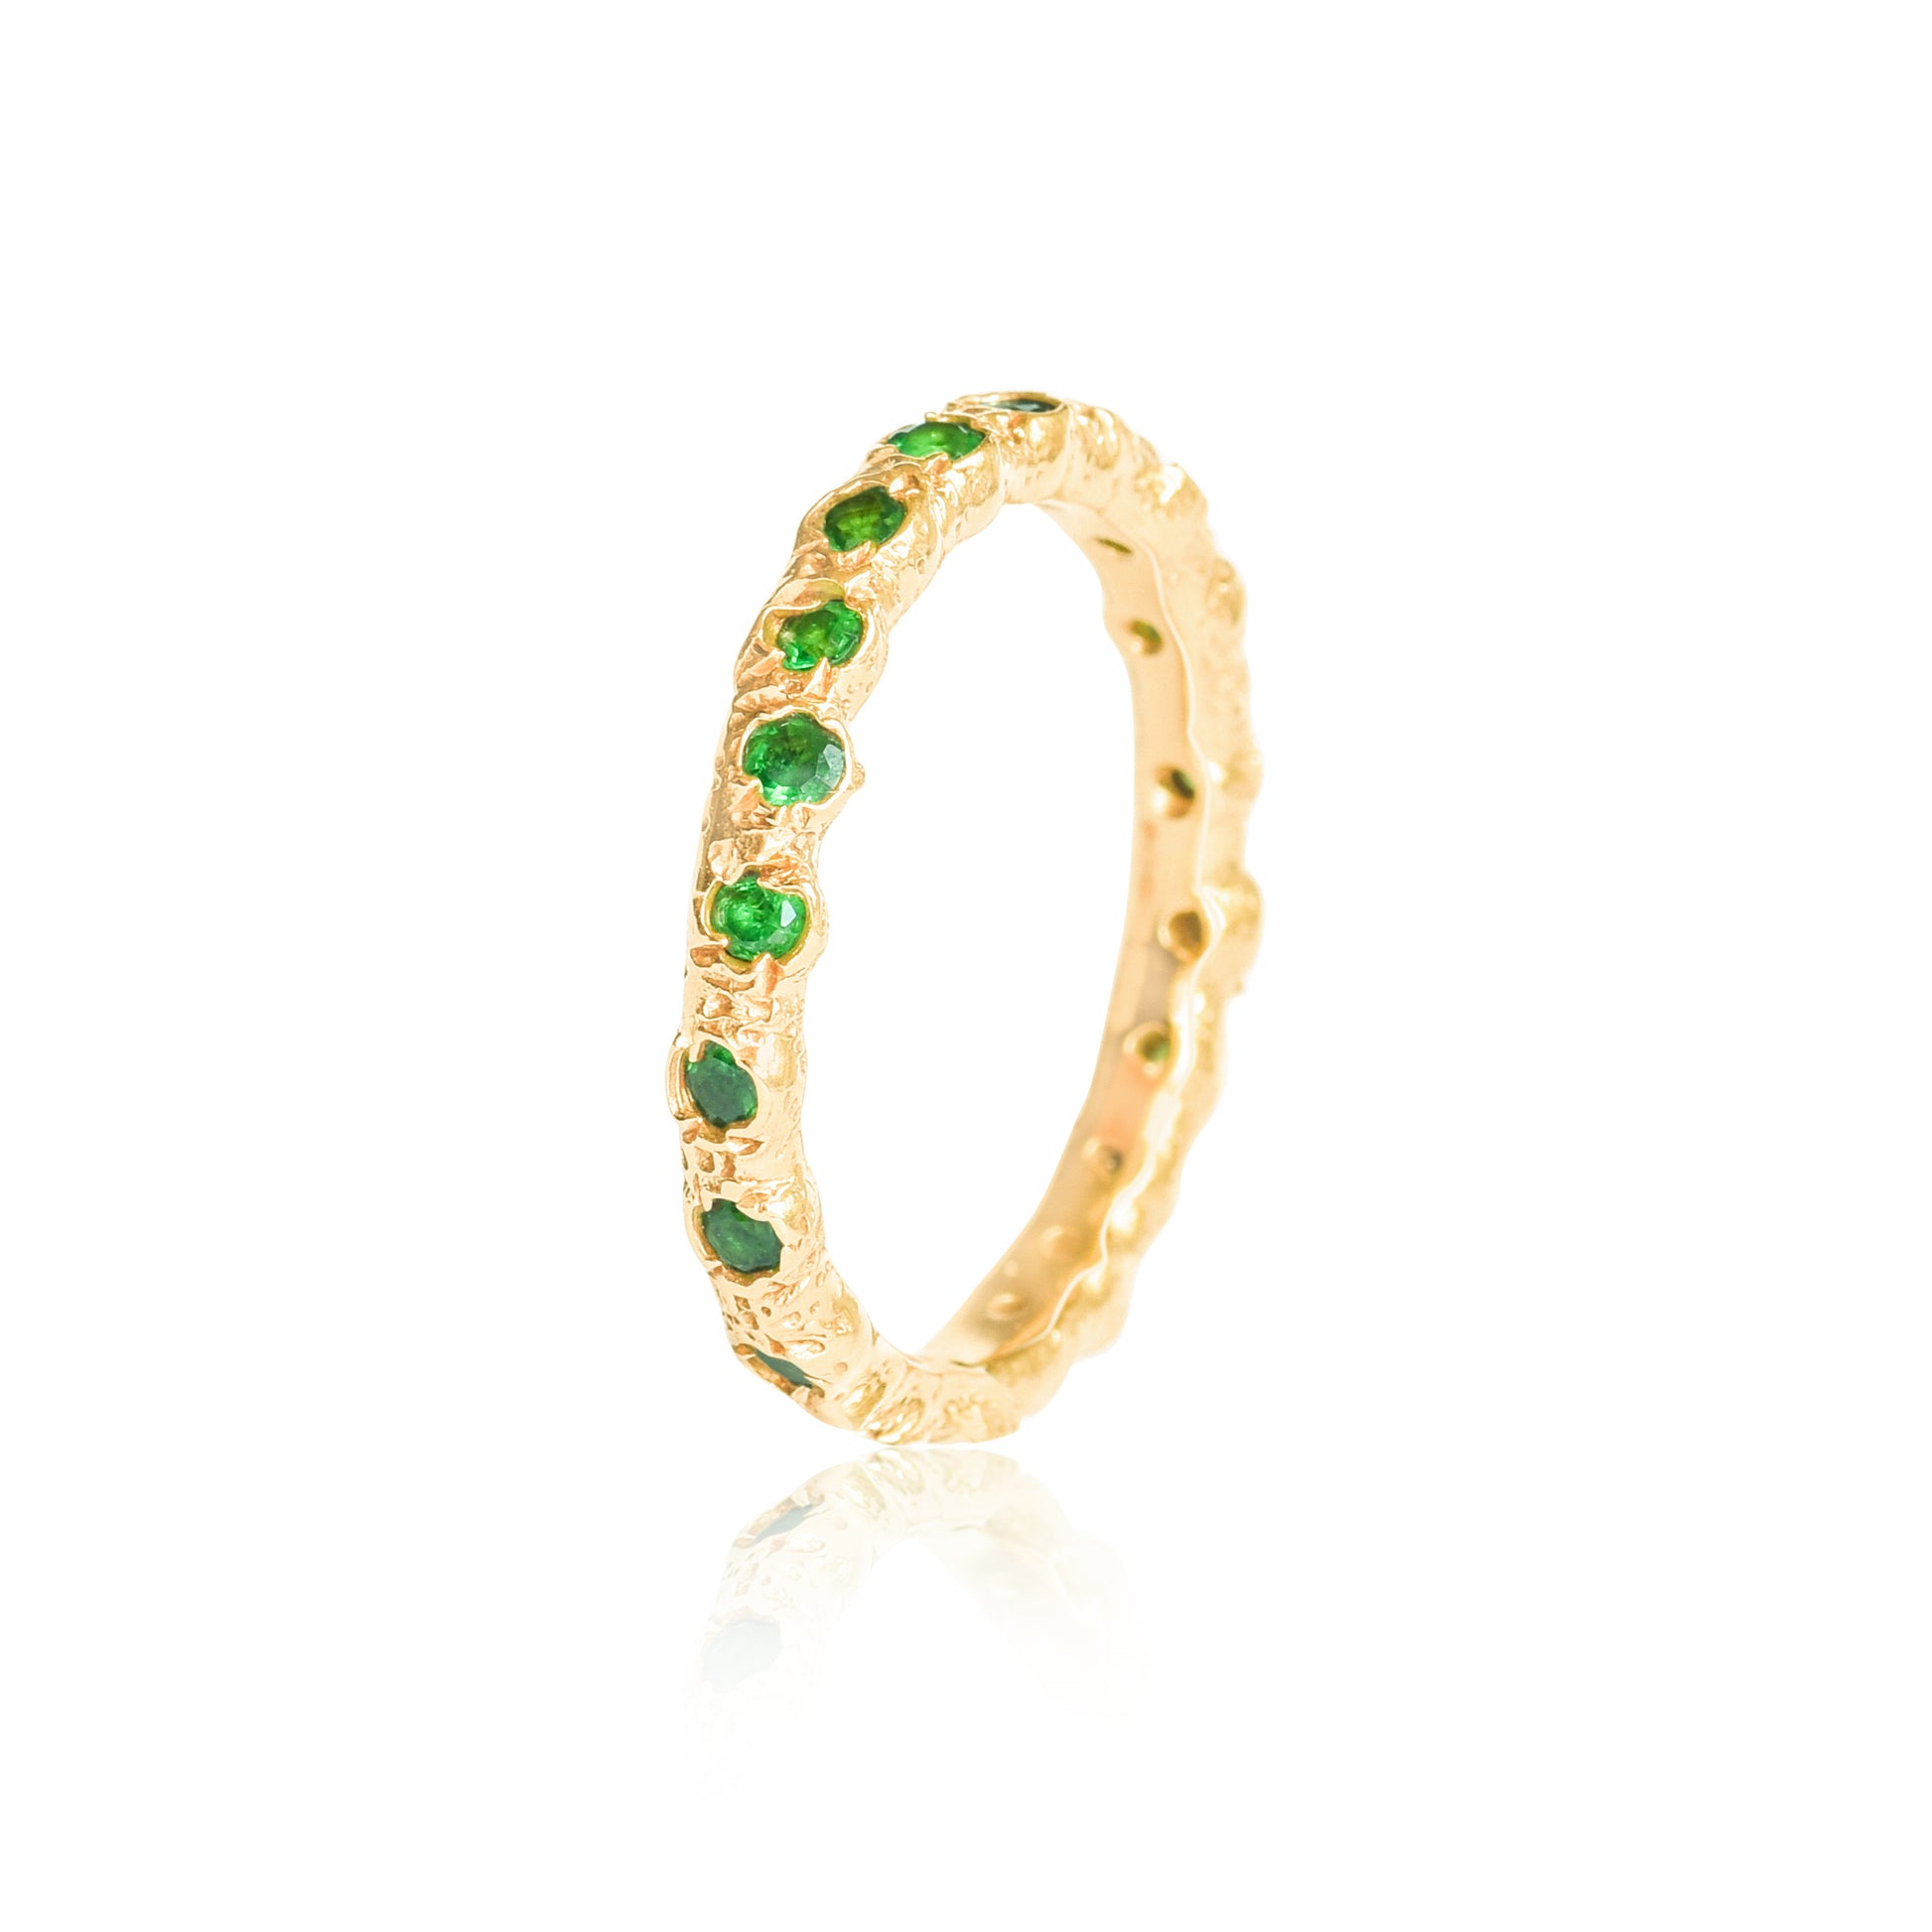  9 Carat yellow gold, Eternity ring set with natural green tsavorites. - LaParra Jewels-bespoke and one of a kind fine jewellery handmade in britain london